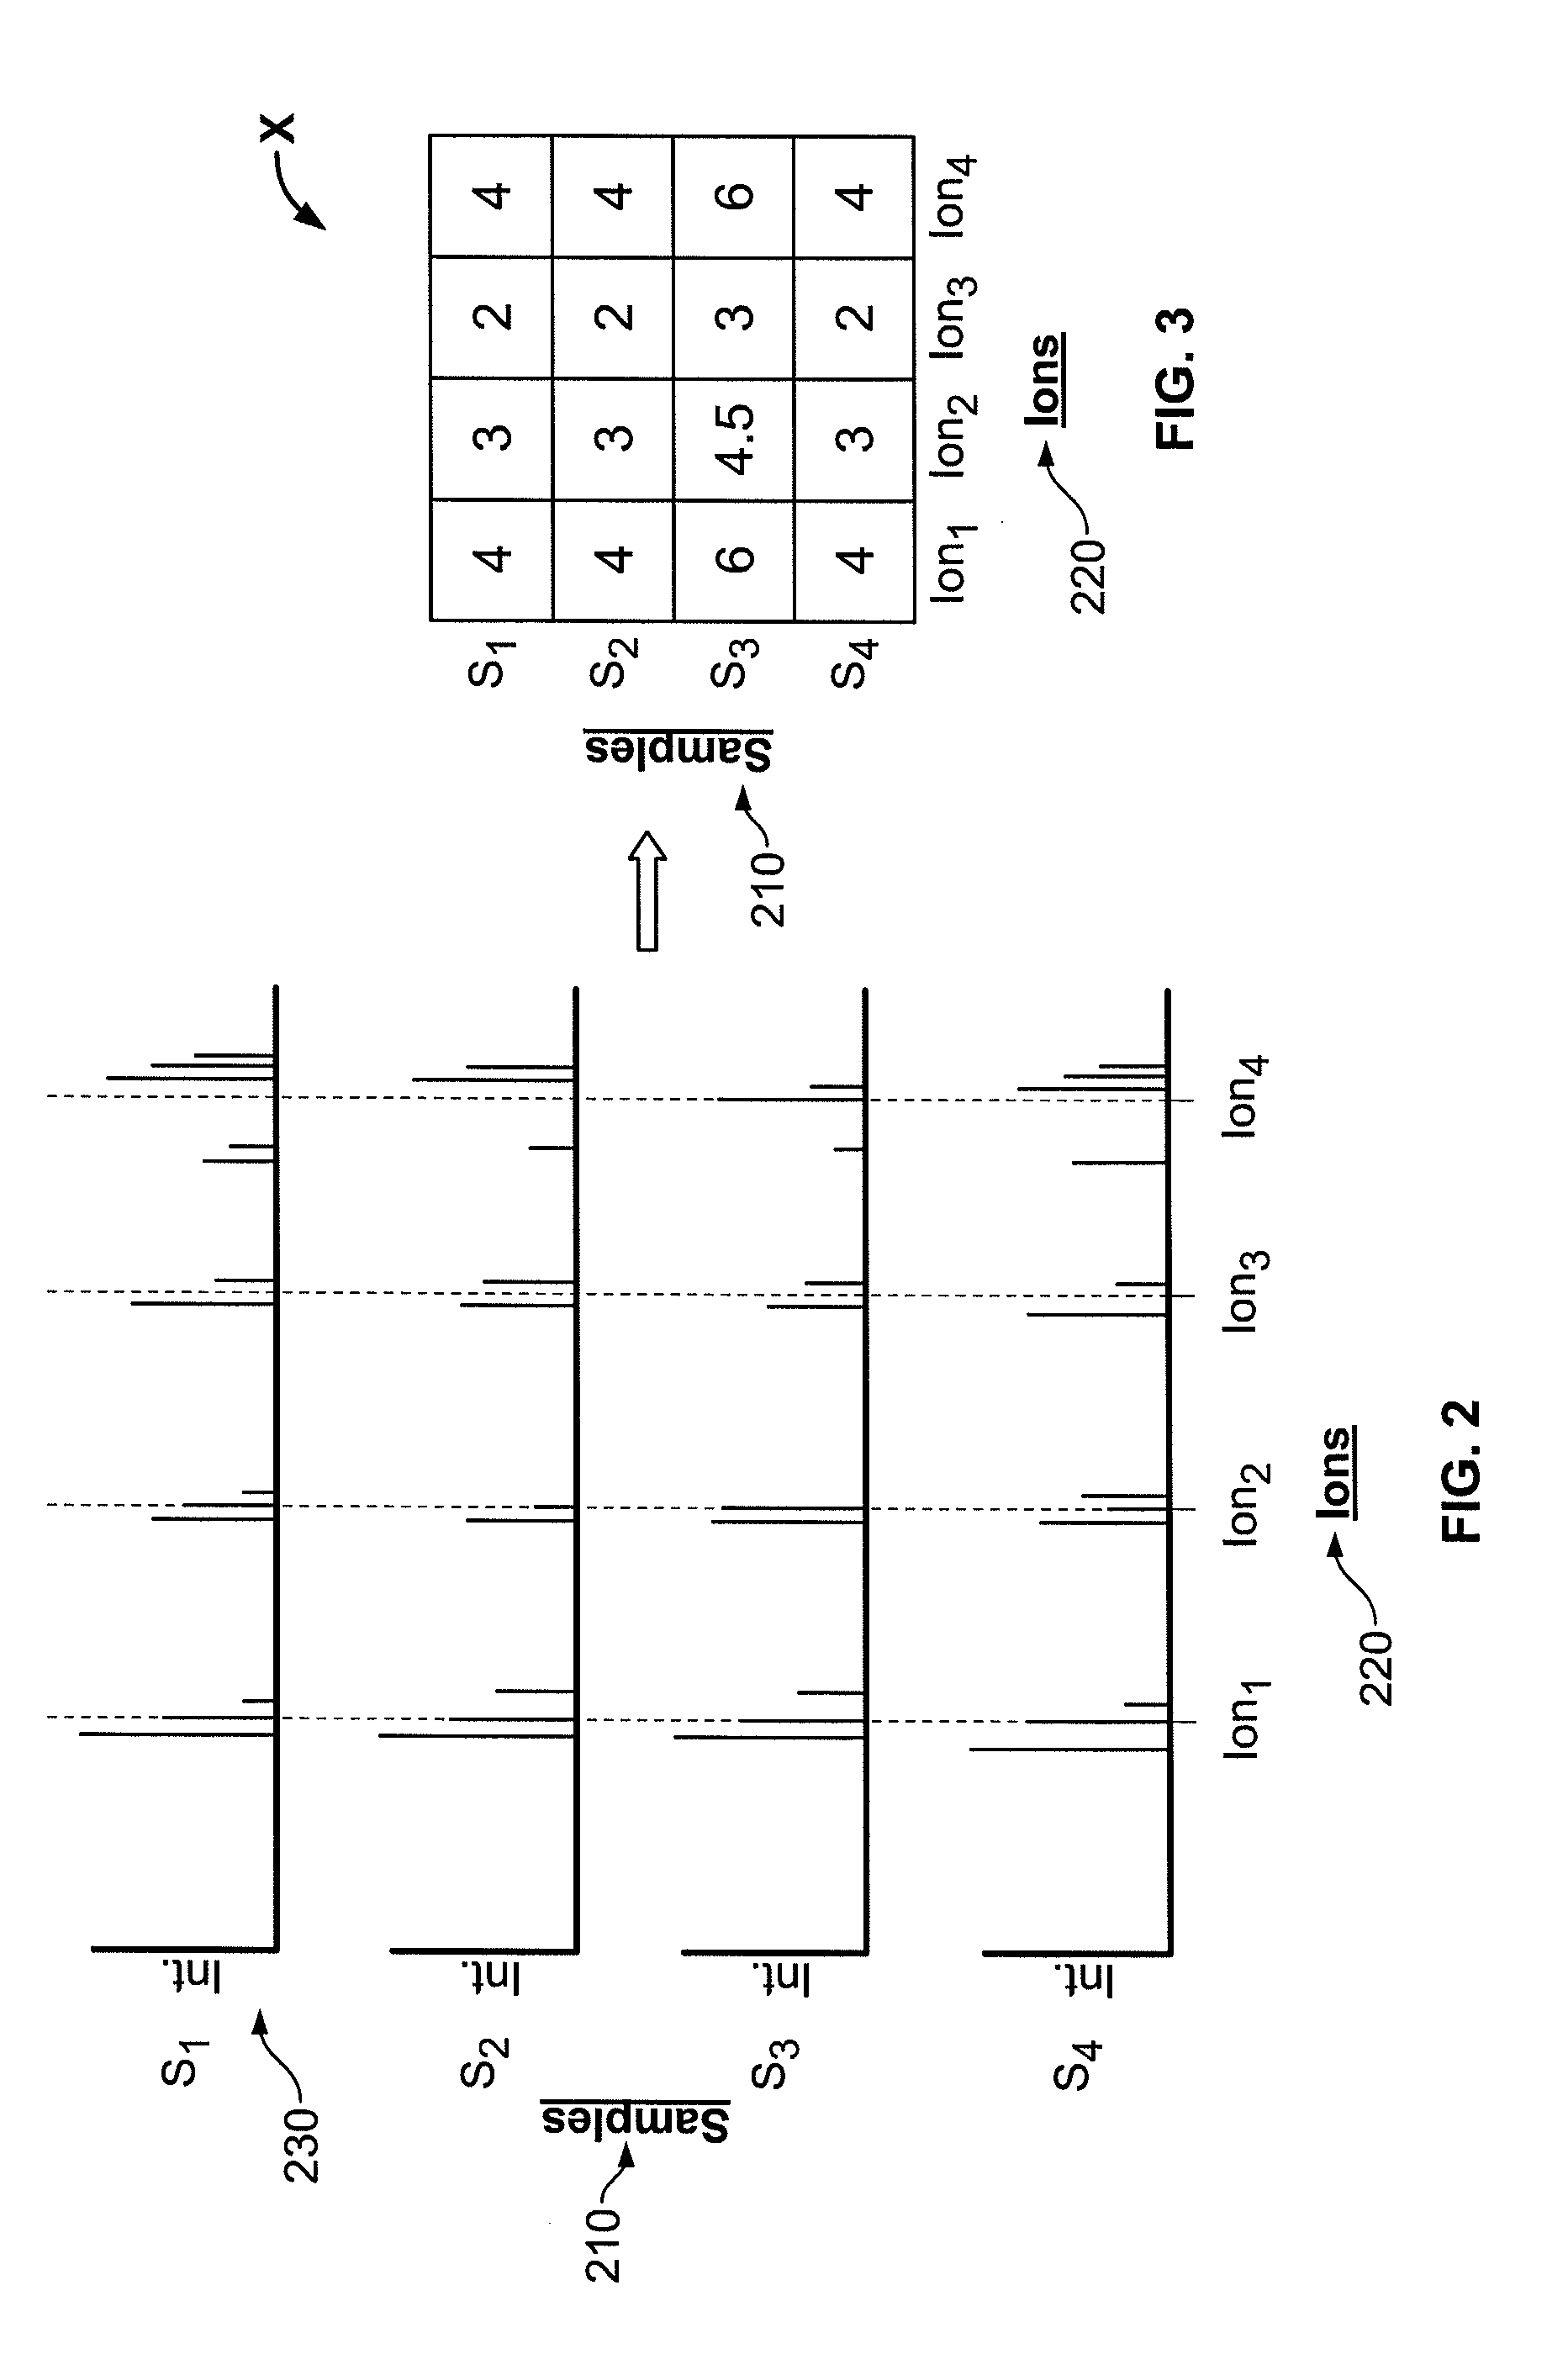 System, method, and computer program product for analyzing spectrometry data to identify and quantify individual components in a sample